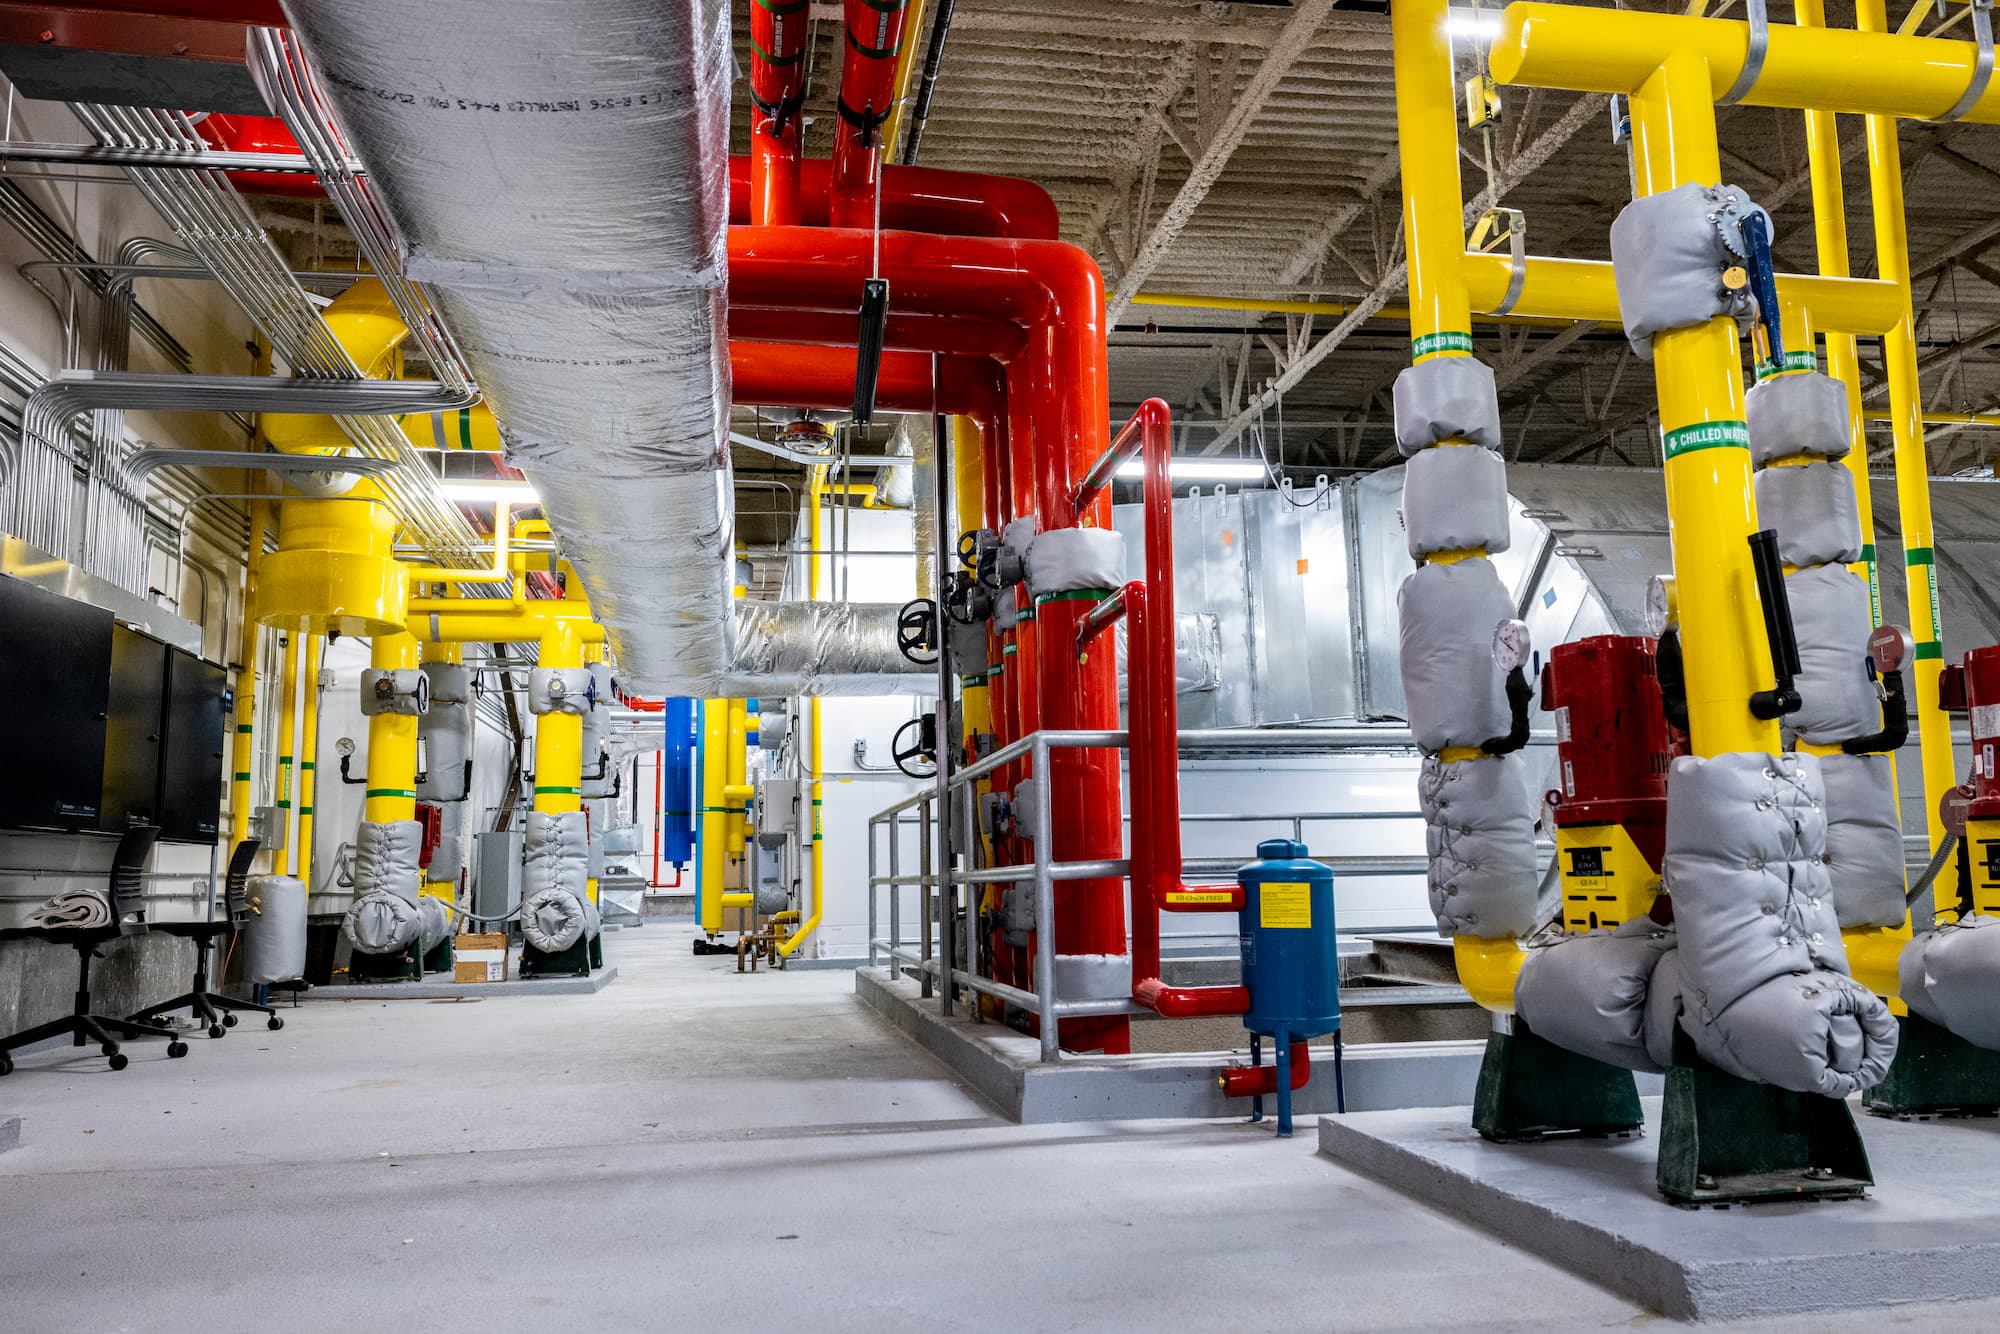 Photo of an HVAC room, with multicolored pipes spanning the entire room.